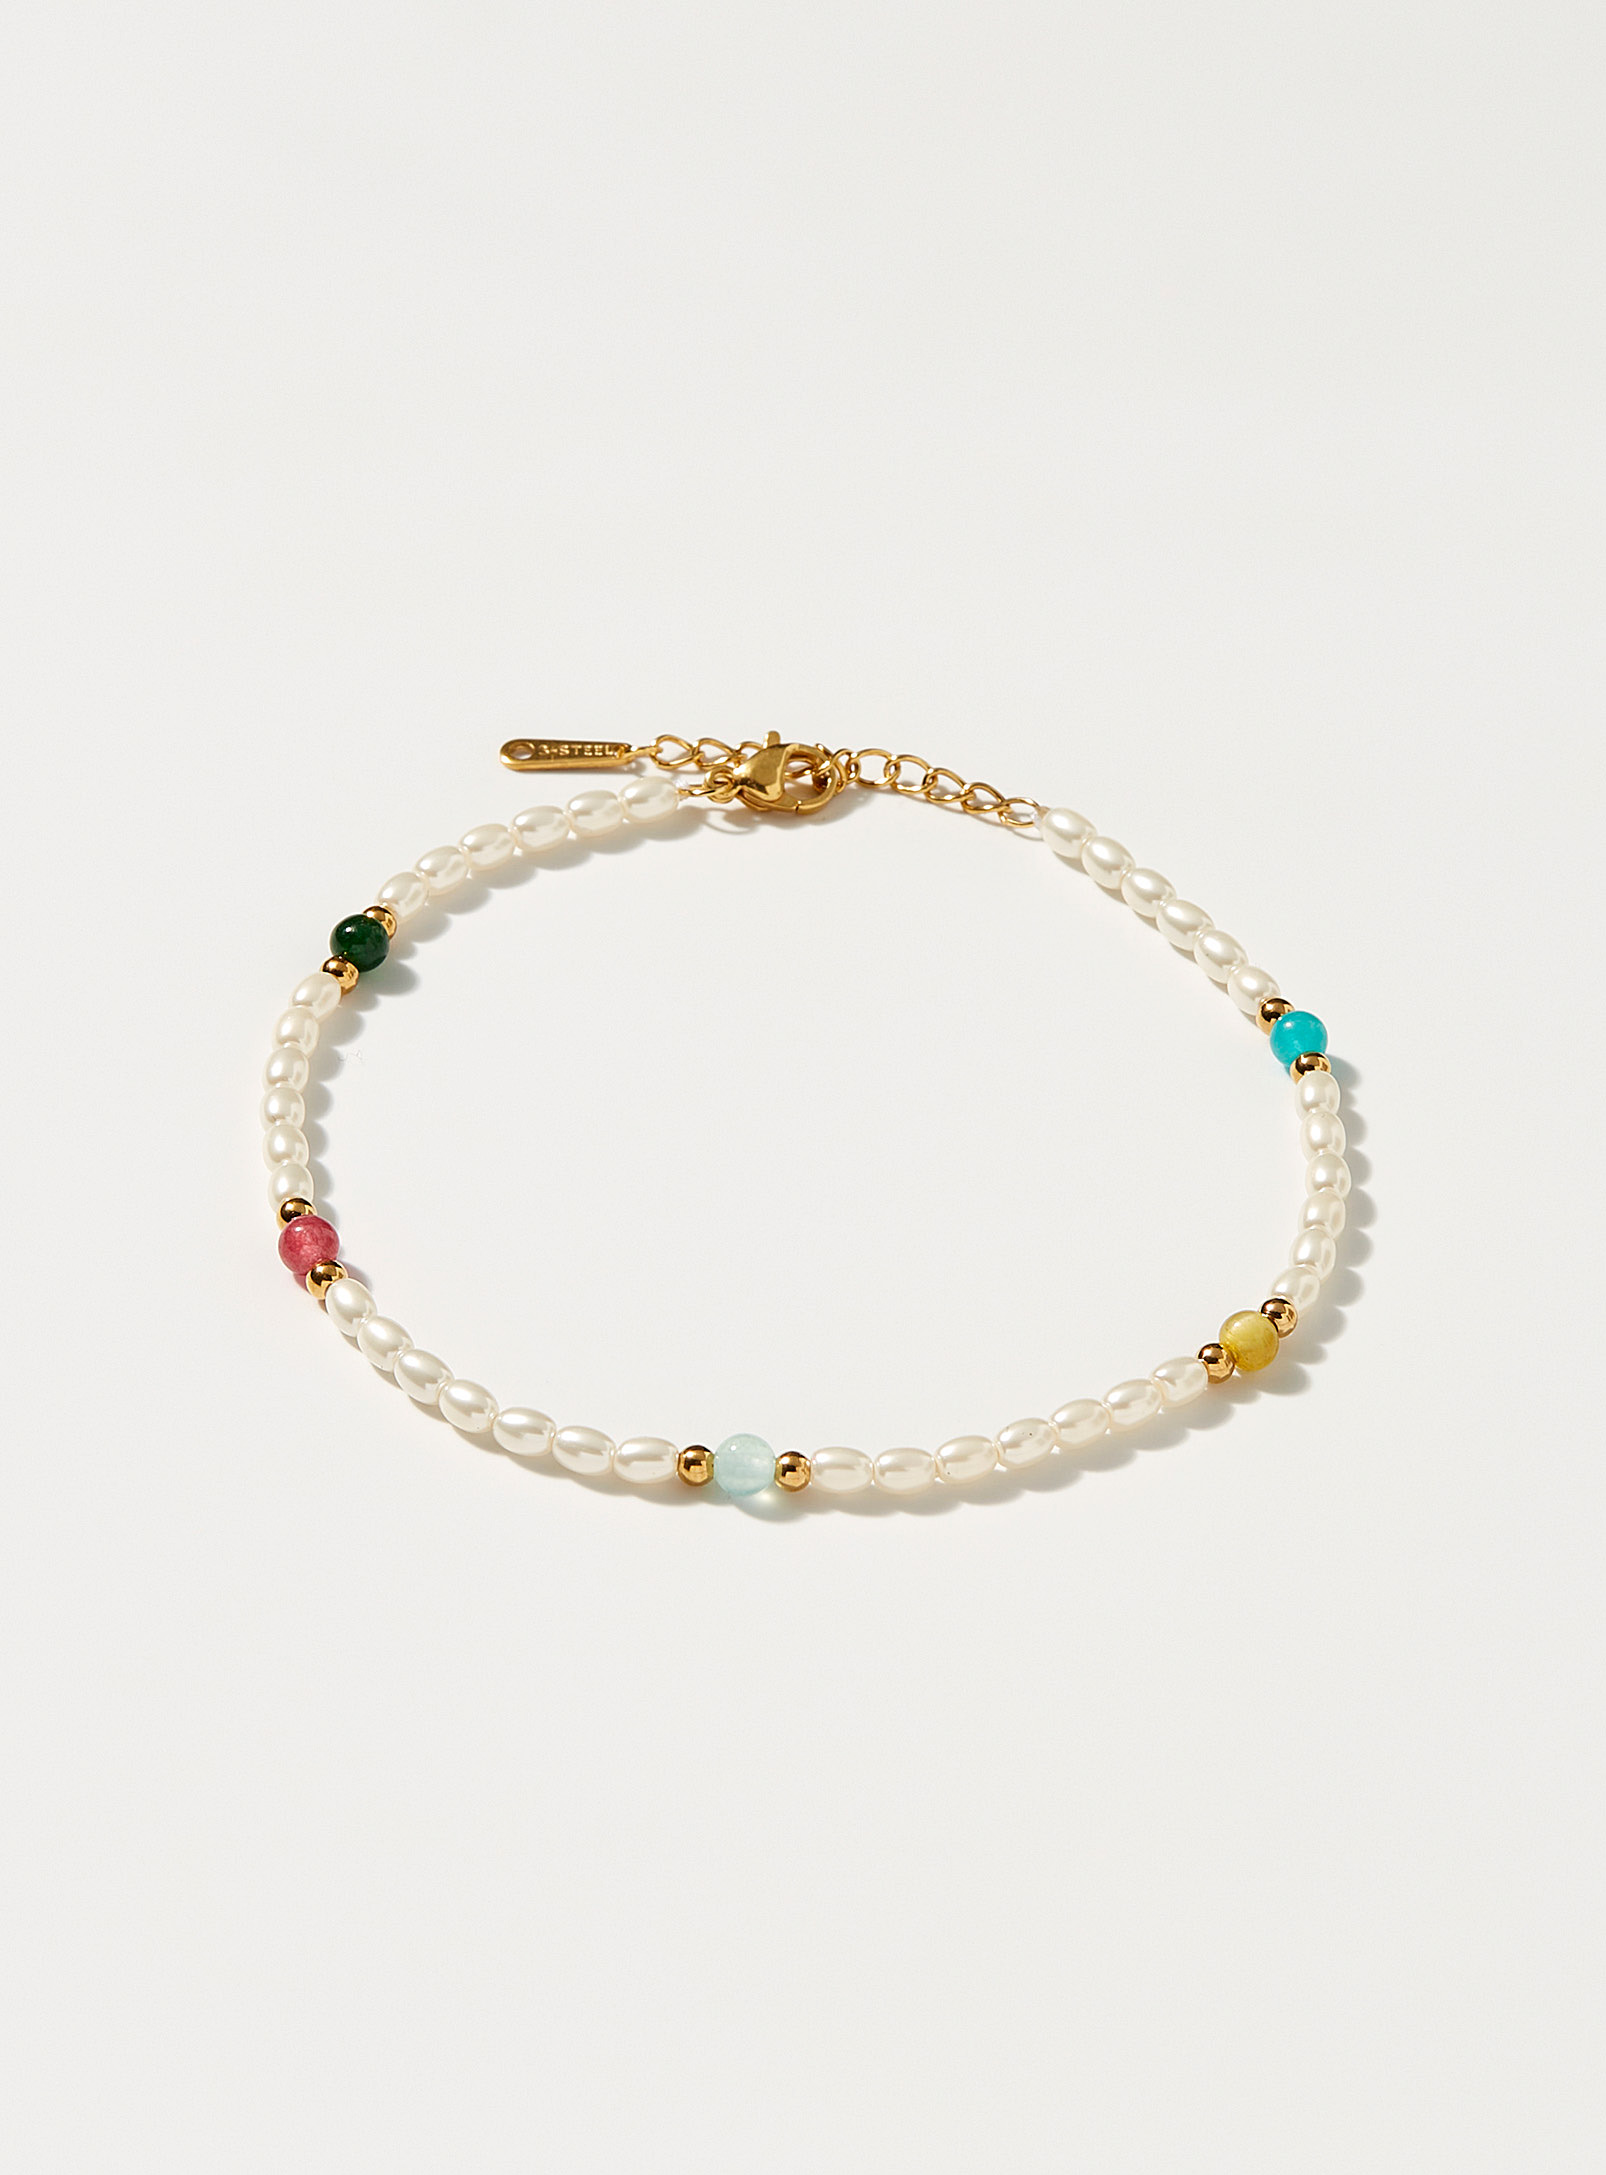 Simons - Women's Pearly bead and natural stone anklet